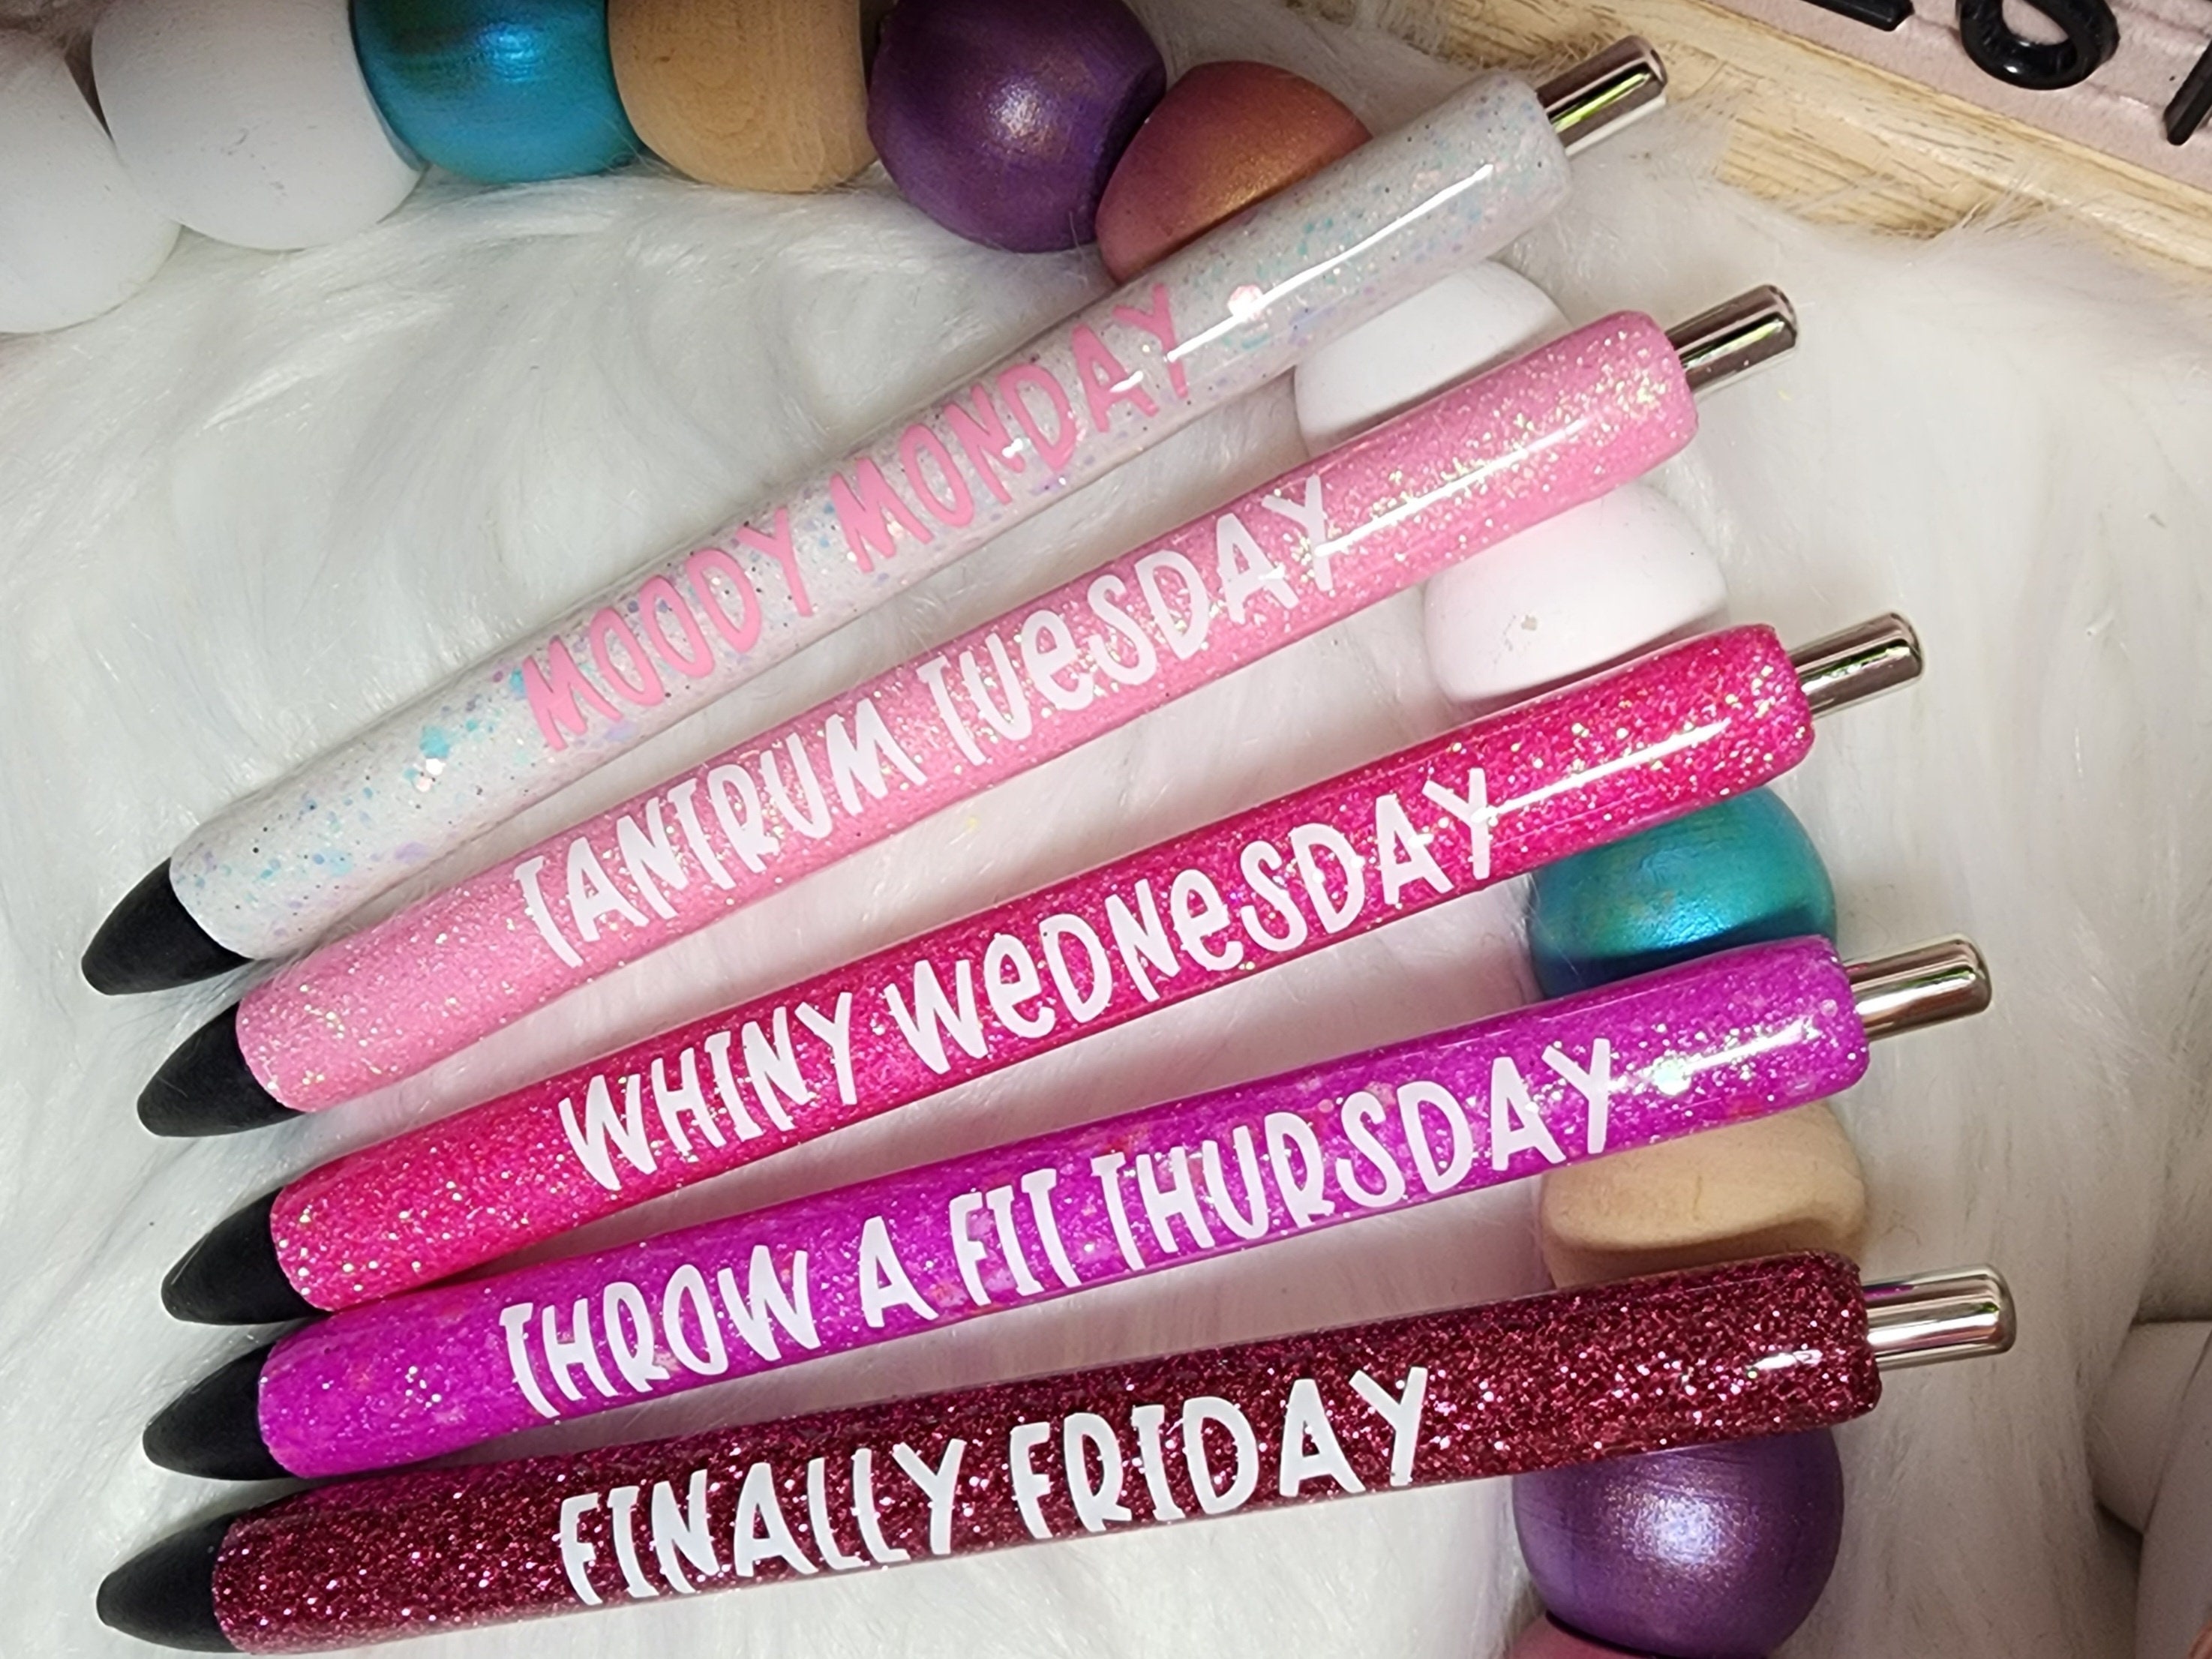 Days of the Week Pens, Moody Pens, Sarcastic Pens, Funny Pens, Sassy Pens, Work  Pens, Snarky Pens, Papermate Inkjoy Pens, Refillable Pens 